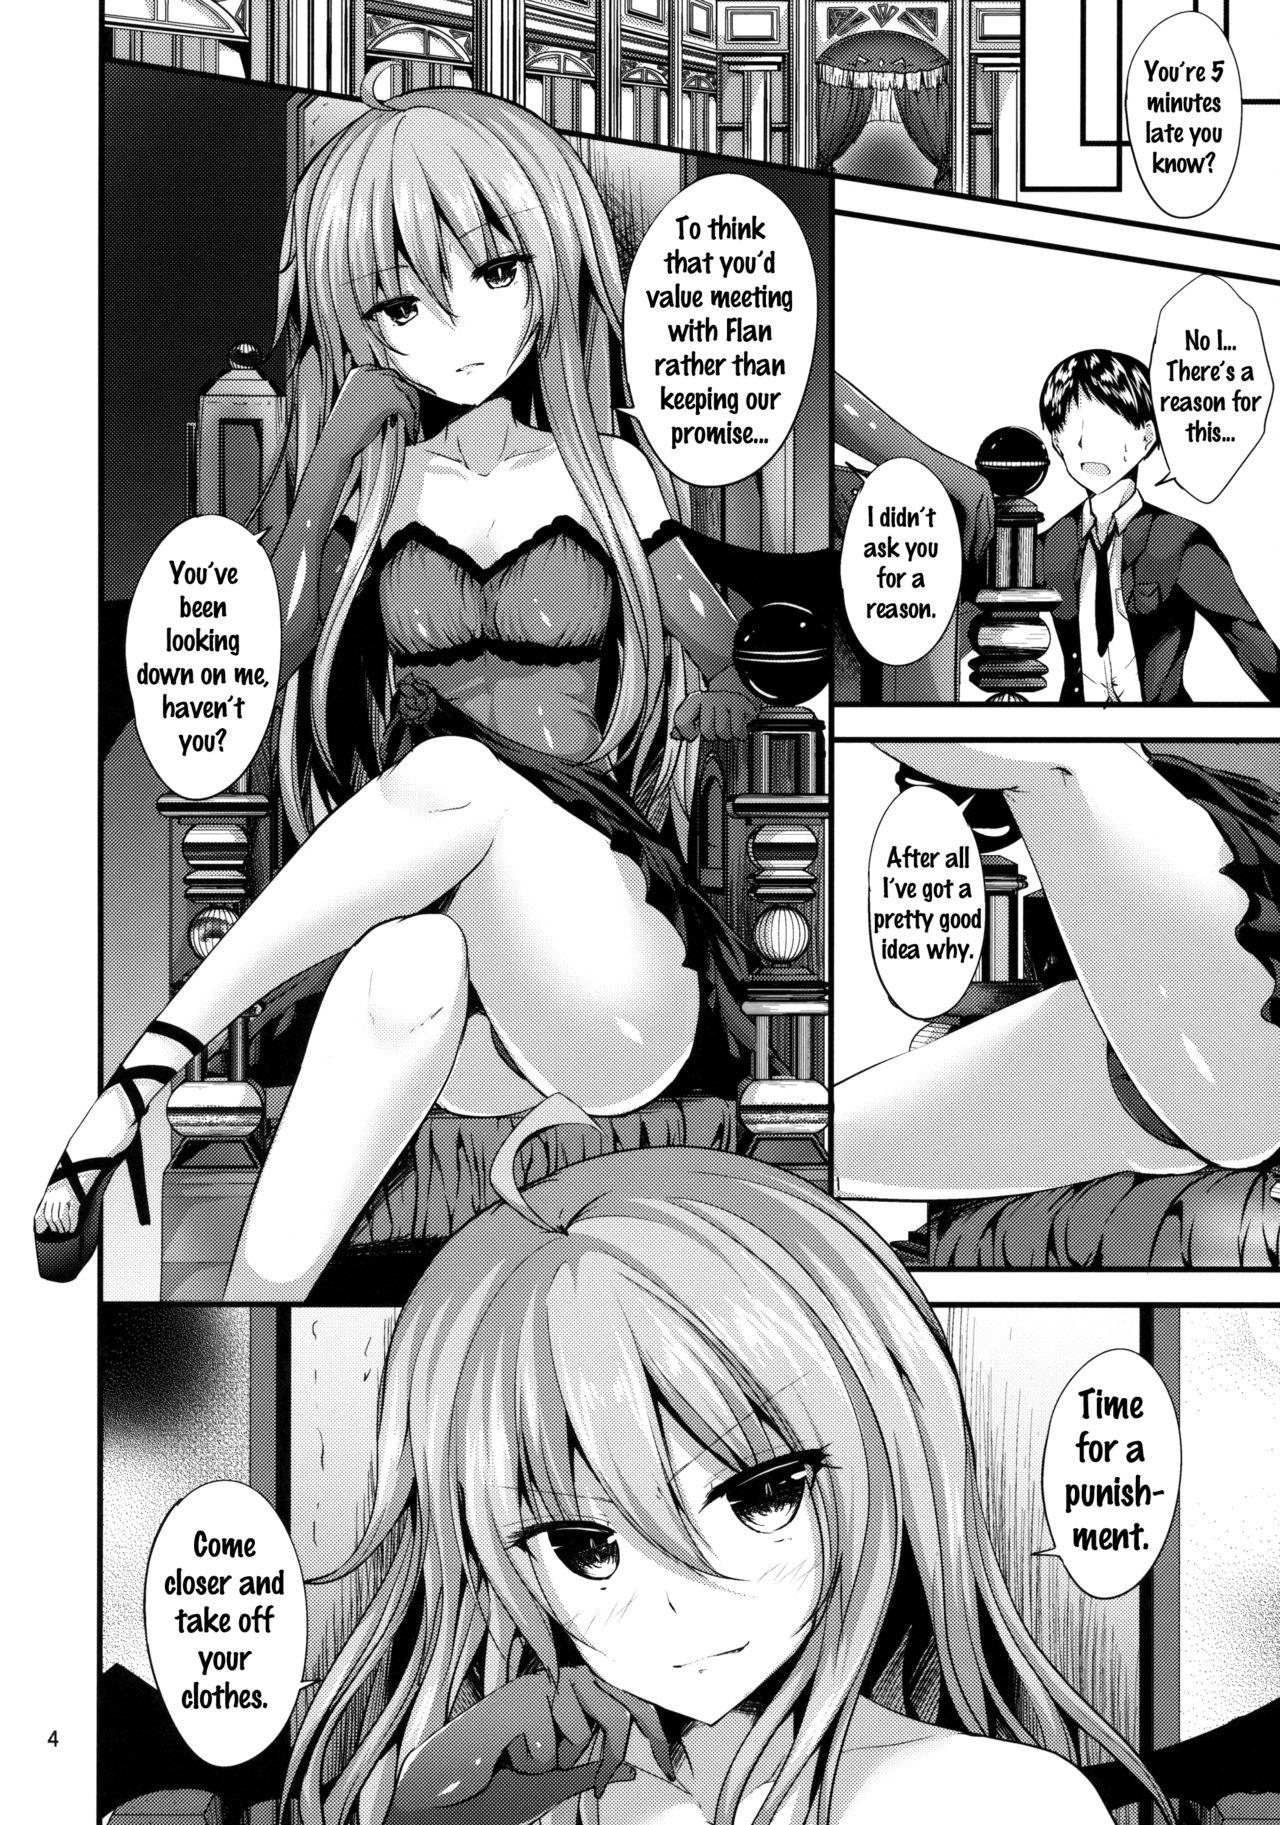 Boys Remi no Motto Otona ni Narumon! | Remi's Becoming More of An Adult! - Touhou project Gay Party - Page 3